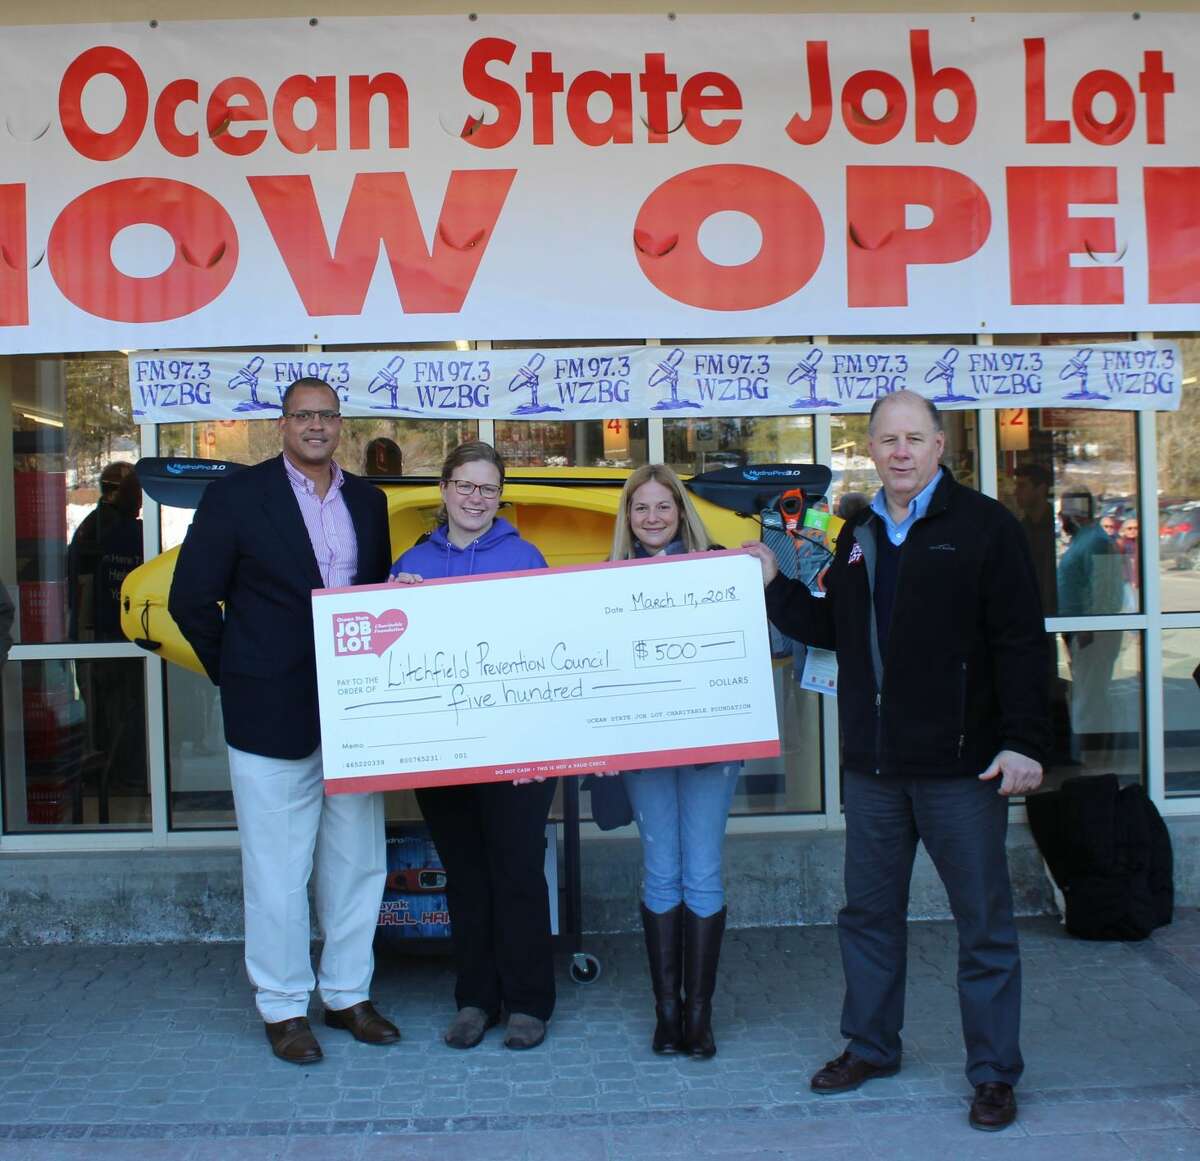 Ocean City Job Lot in Litchfield celebrated its grand opening with a ribbon cutting ceremony and a donation to the Litchfield Prevention Council. From left are James Hines, Ocean State Job Lot Regional Director; Jaime Makuc and Mikki Pettinicchi, Litchfield Prevention Council; and David Sarlitto, Executive Director, Ocean State Job Lot.　